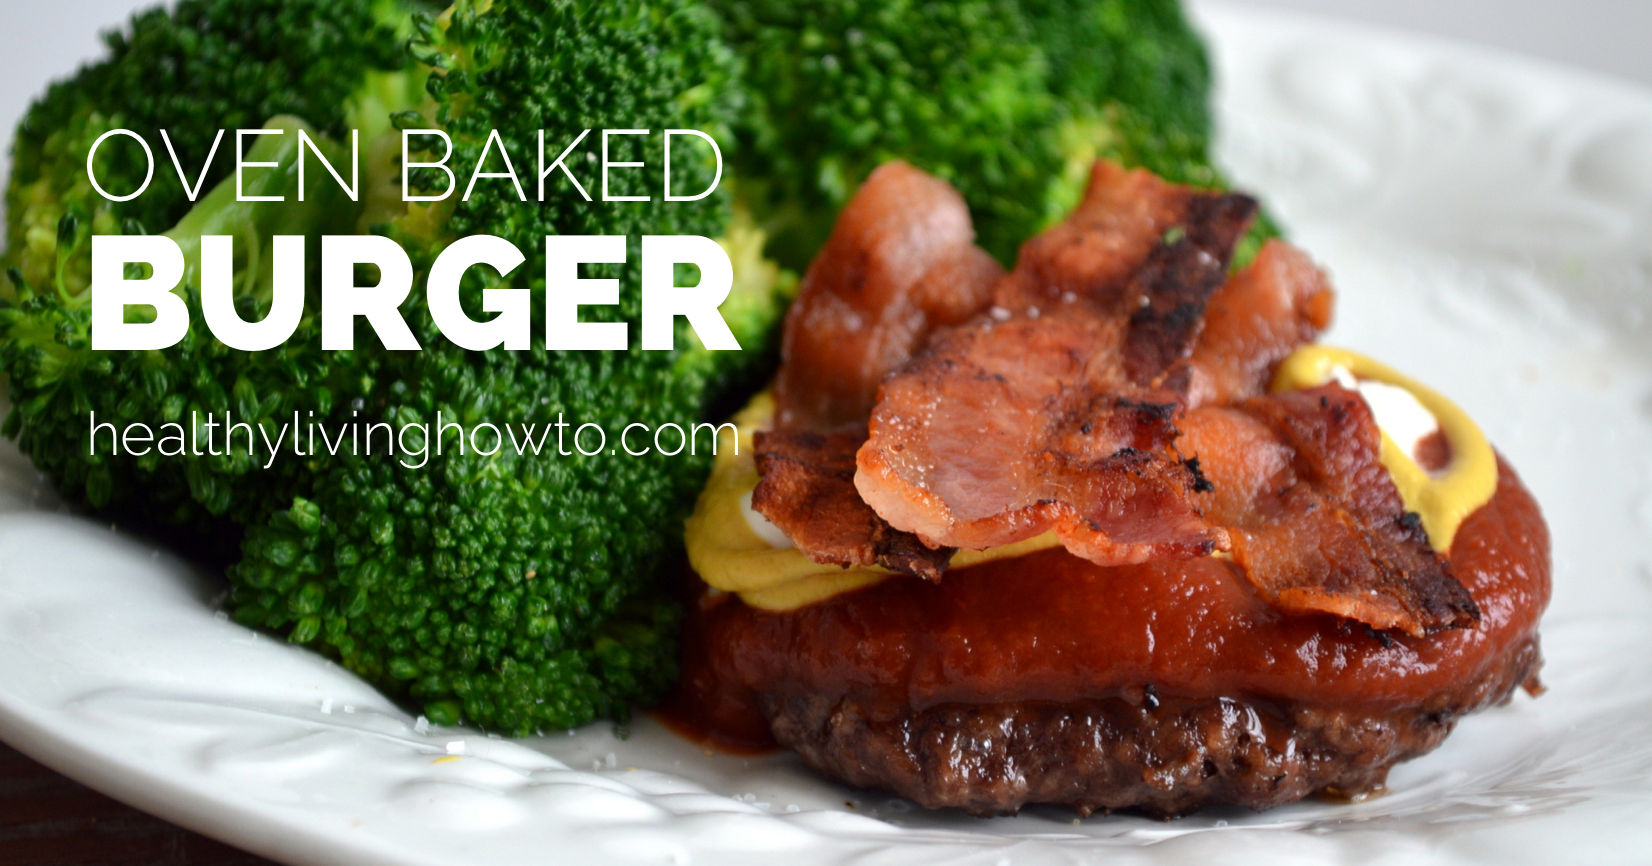 Oven Baked Burger Recipe | healthylivinghowto.com